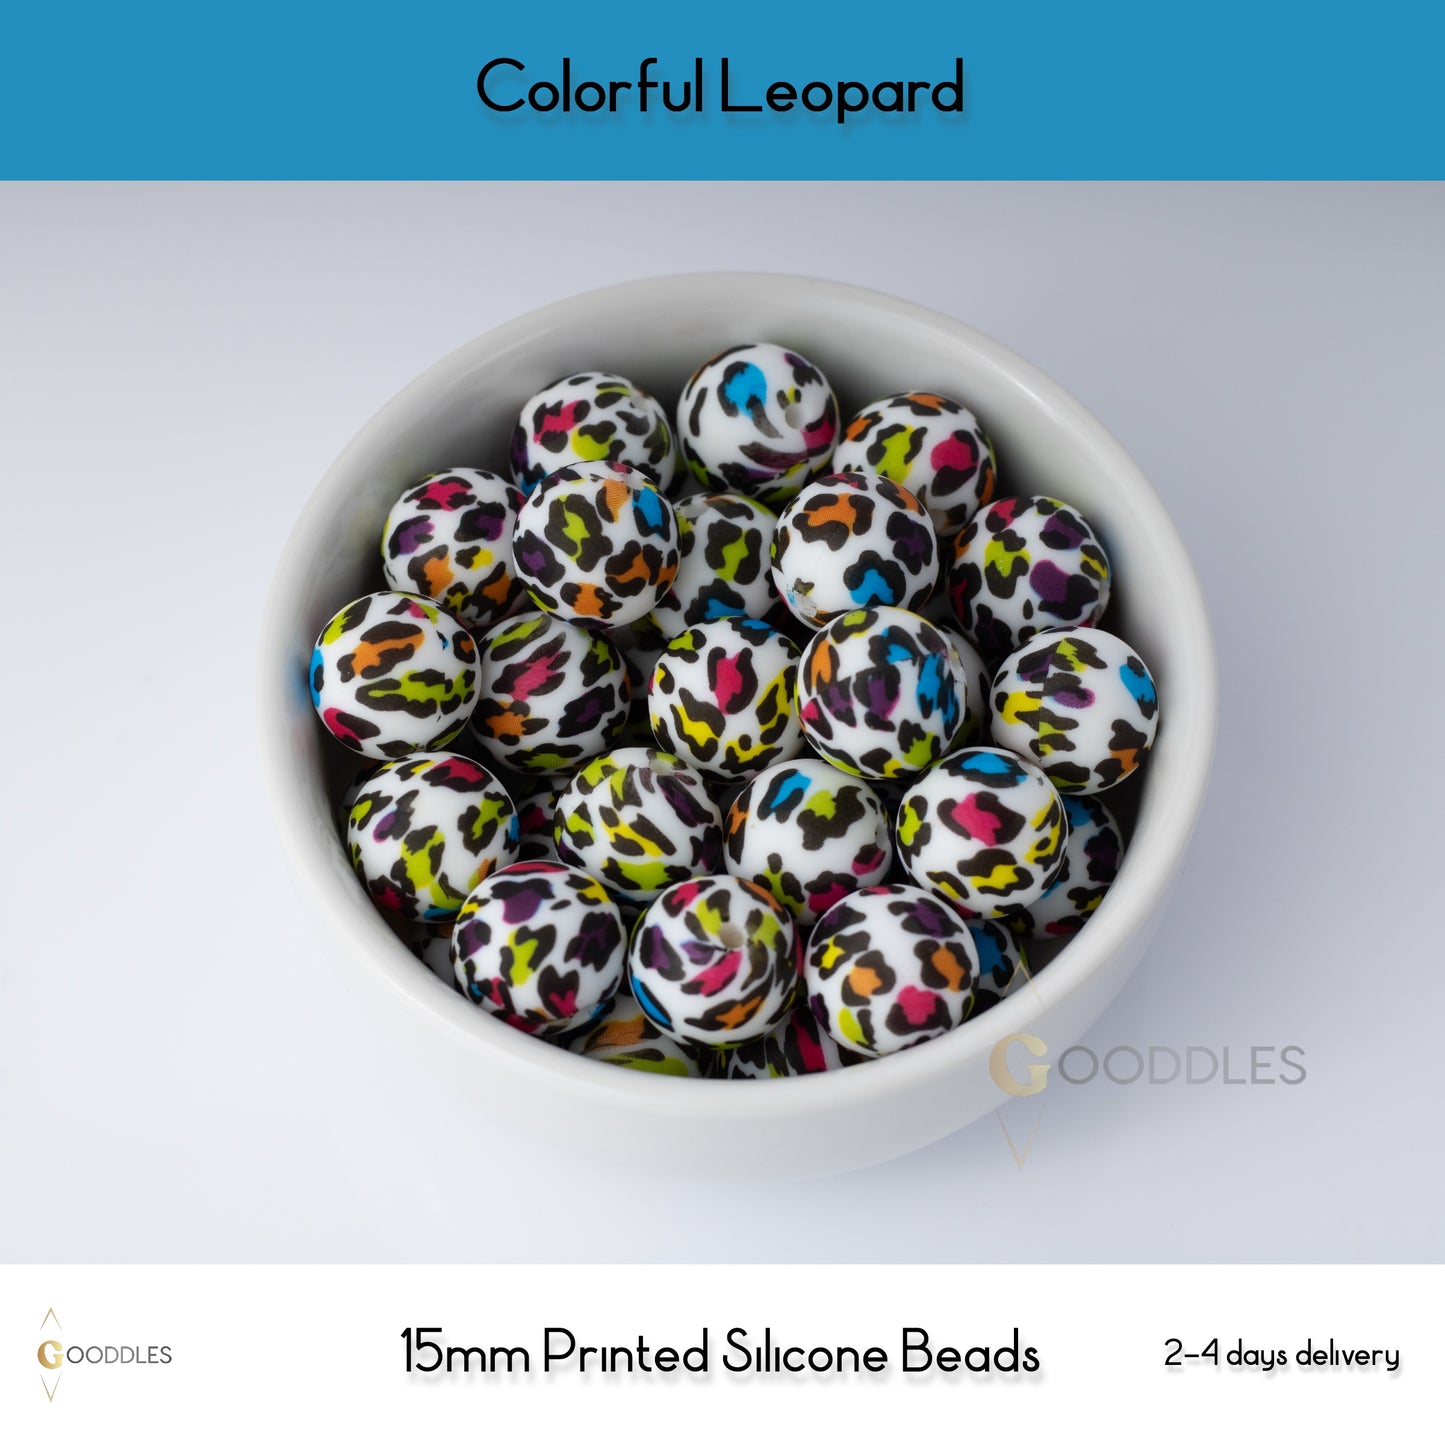 5pcs, Colorful Leopard Silicone Beads Printed Round Silicone Beads